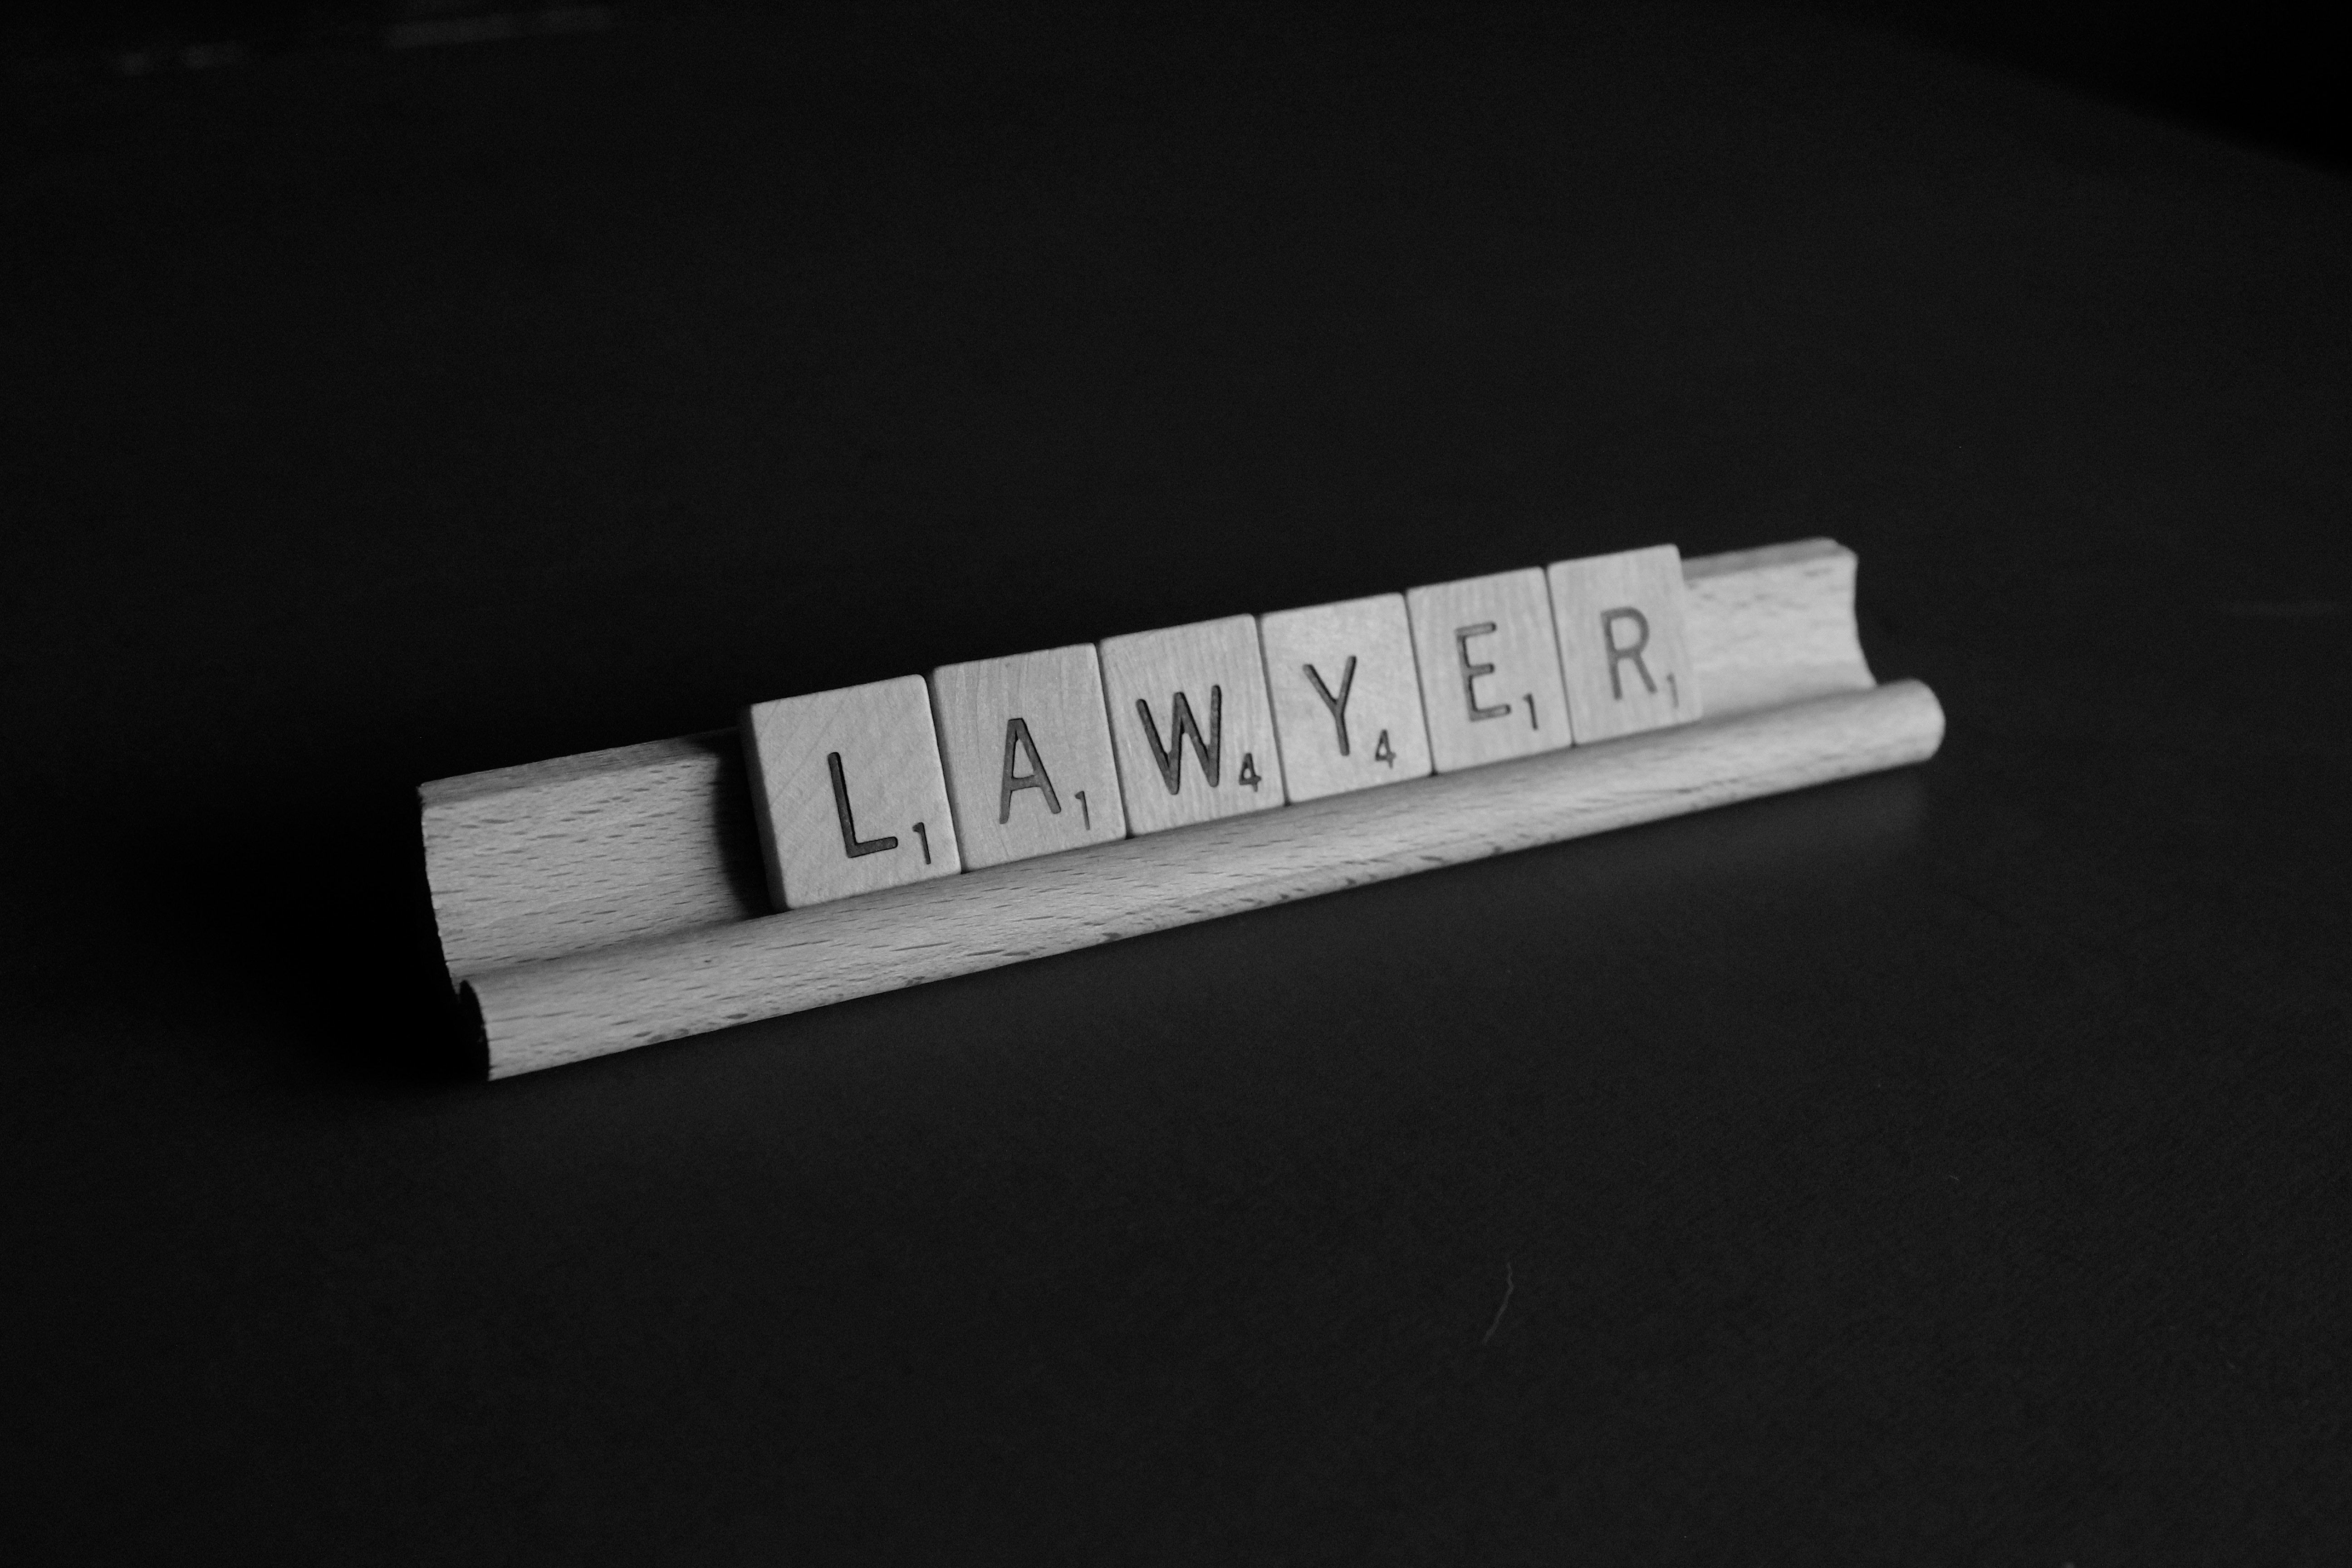 "In a law firm corporate and commercial are